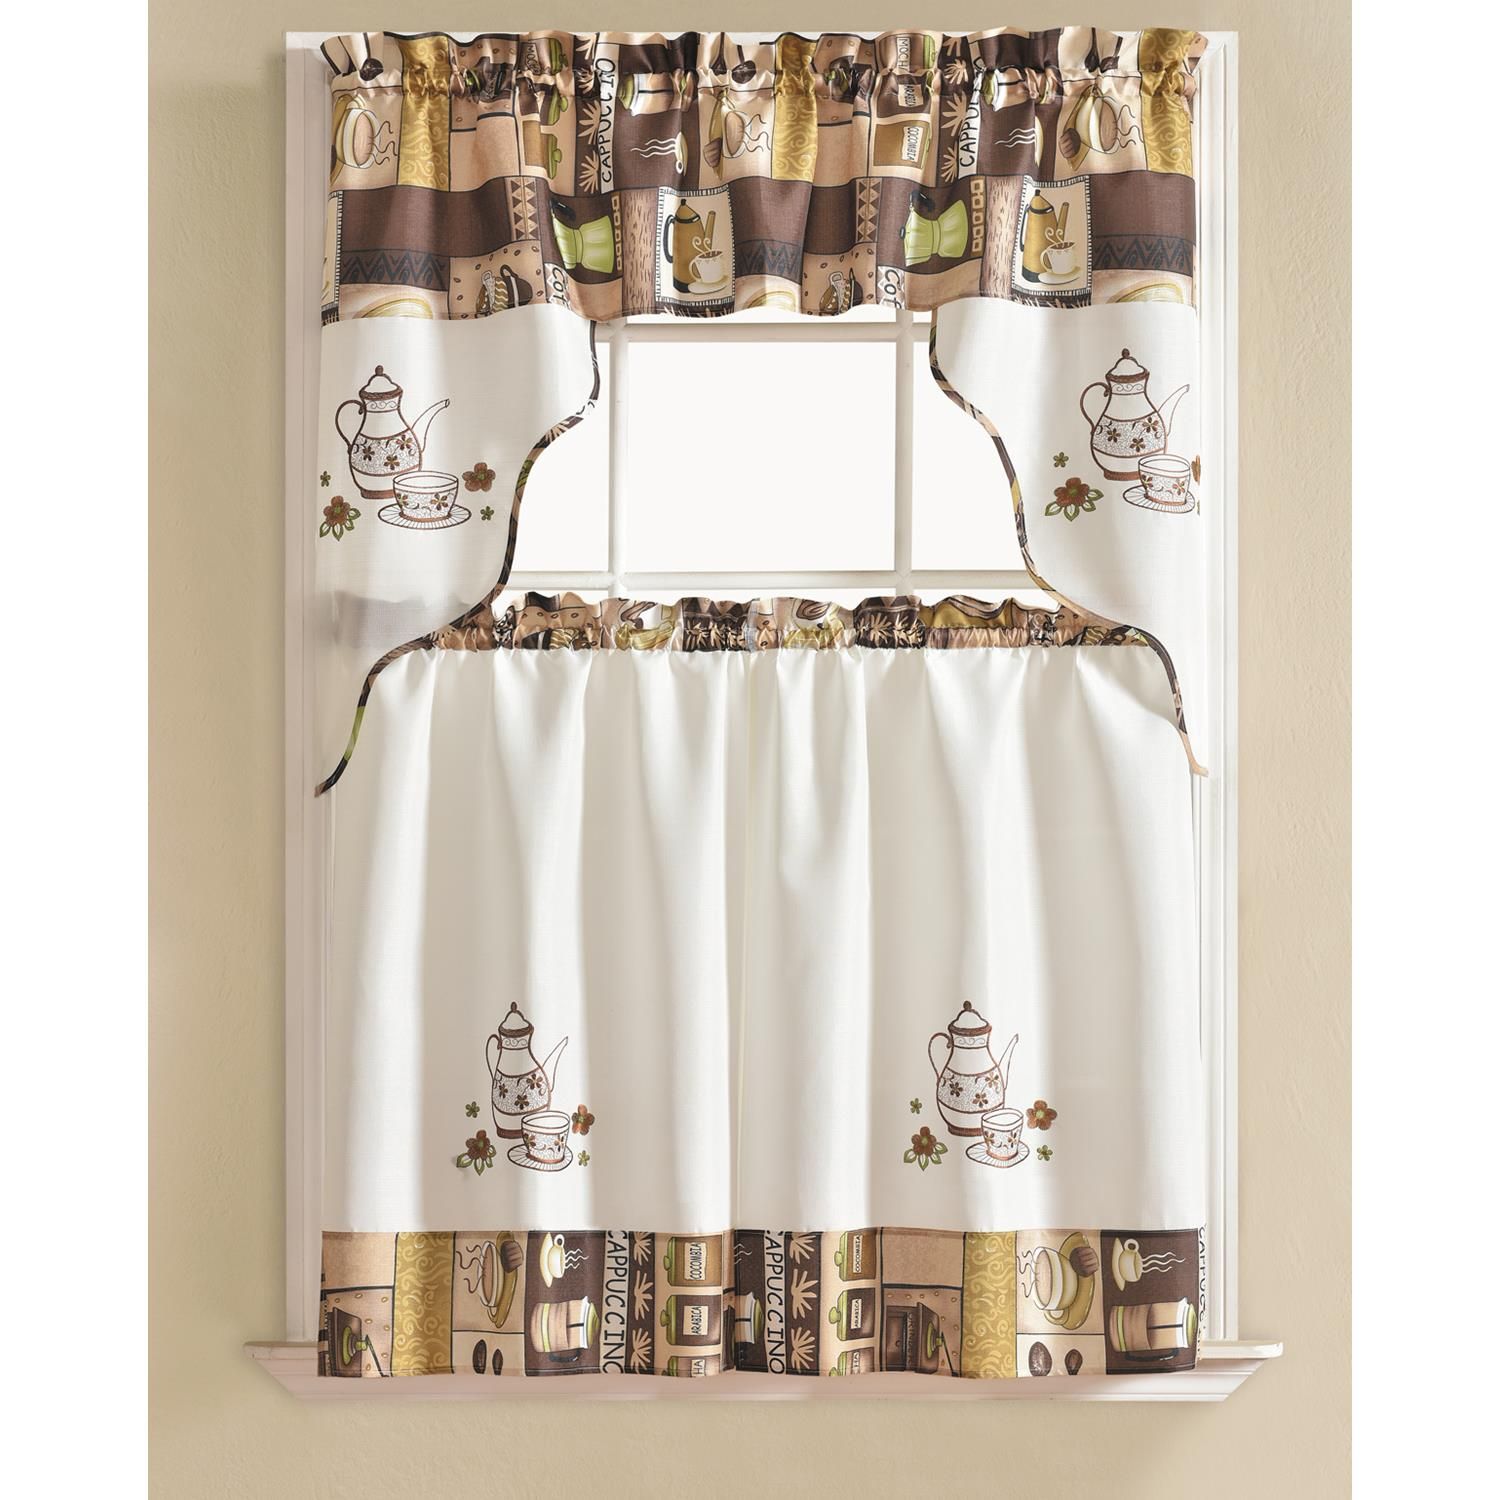 Details About Urban Embroidered Coffee Tier And Valance Kitchen Curtain Set With Multicolored Printed Curtain Tier And Swag Sets (View 14 of 20)